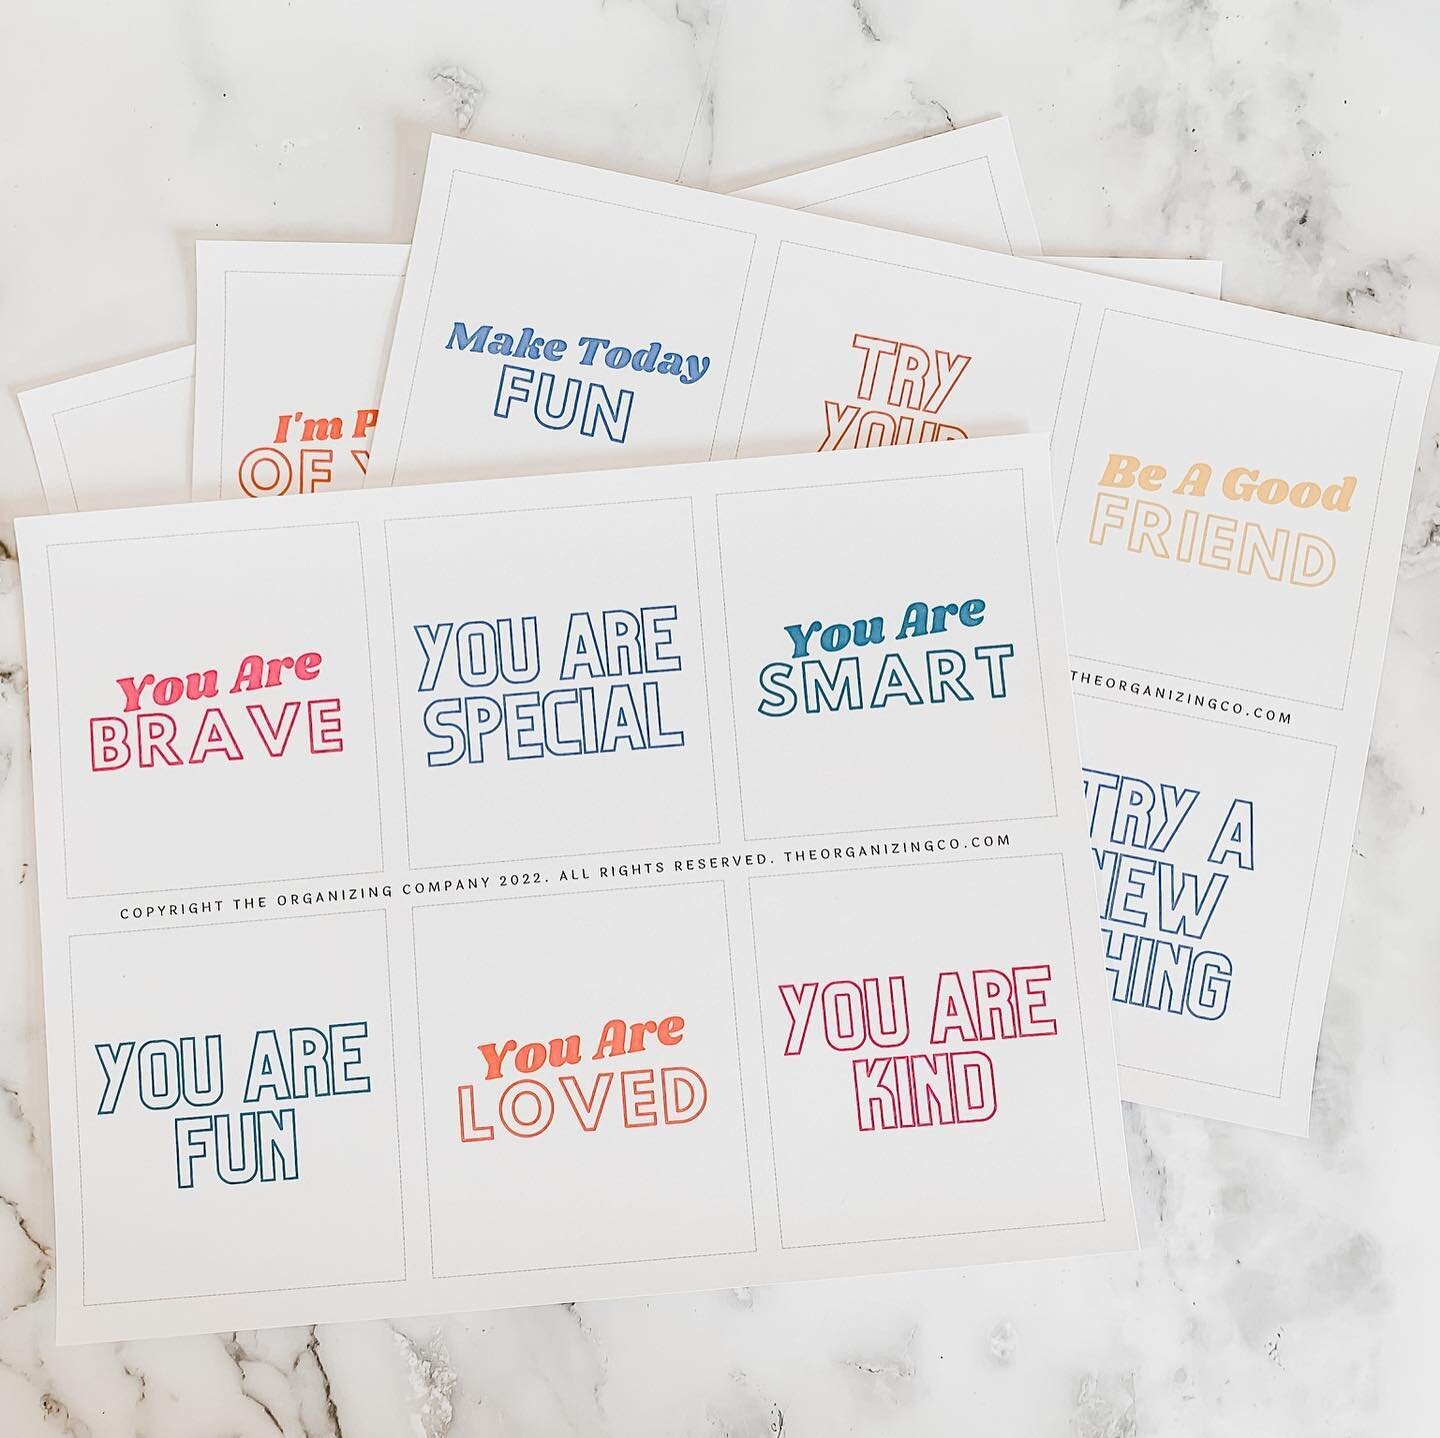 Lunchbox Love Notes are back! Download these FREE printable notes to add a little love to your kid's lunchbox! ⁠
⁠
Link in bio.